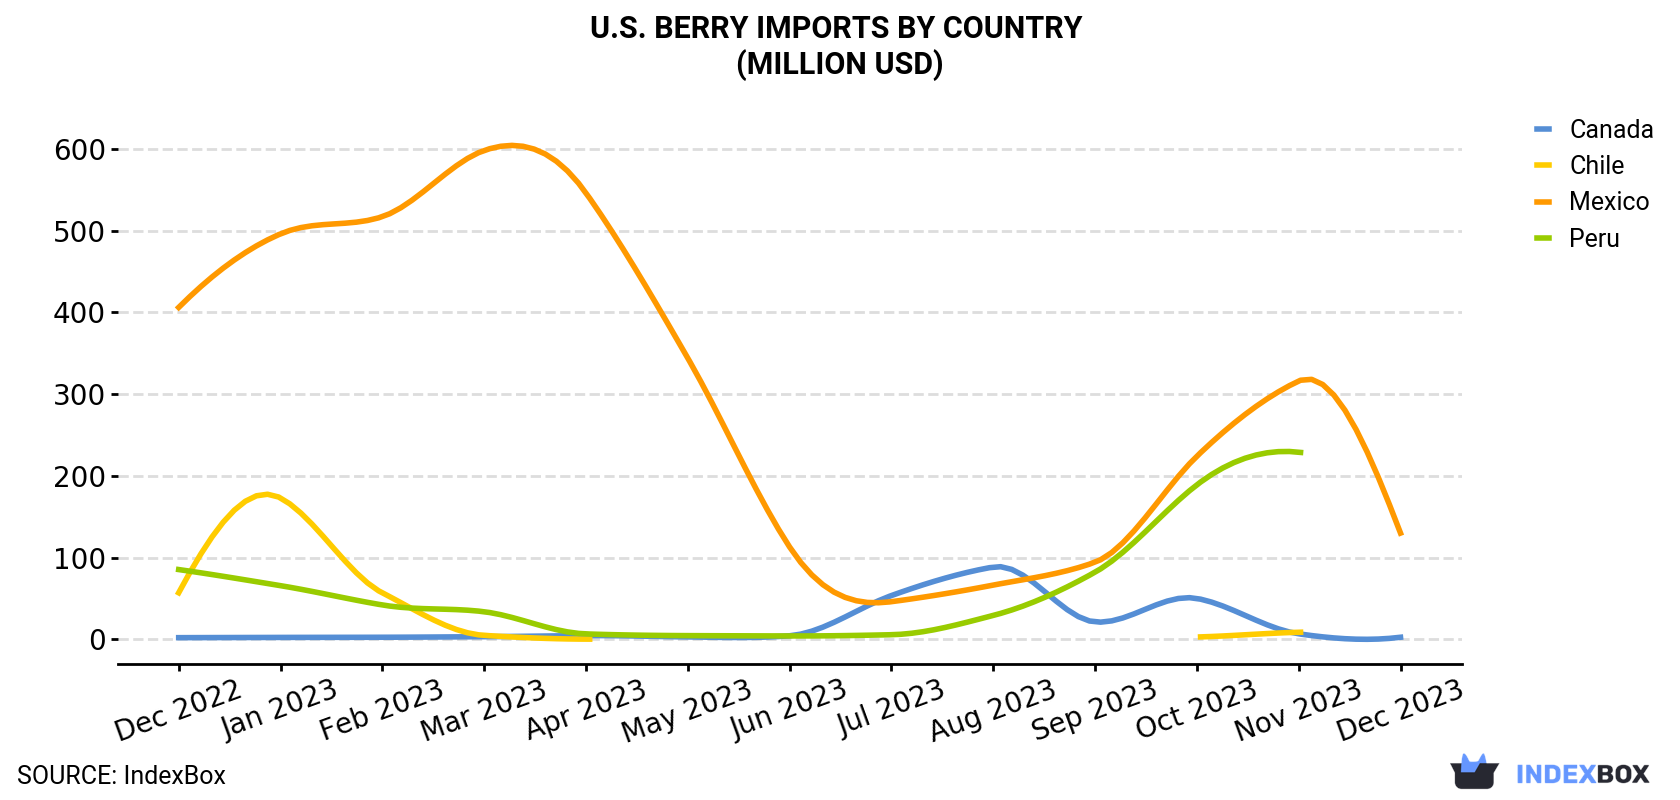 U.S. Berry Imports By Country (Million USD)